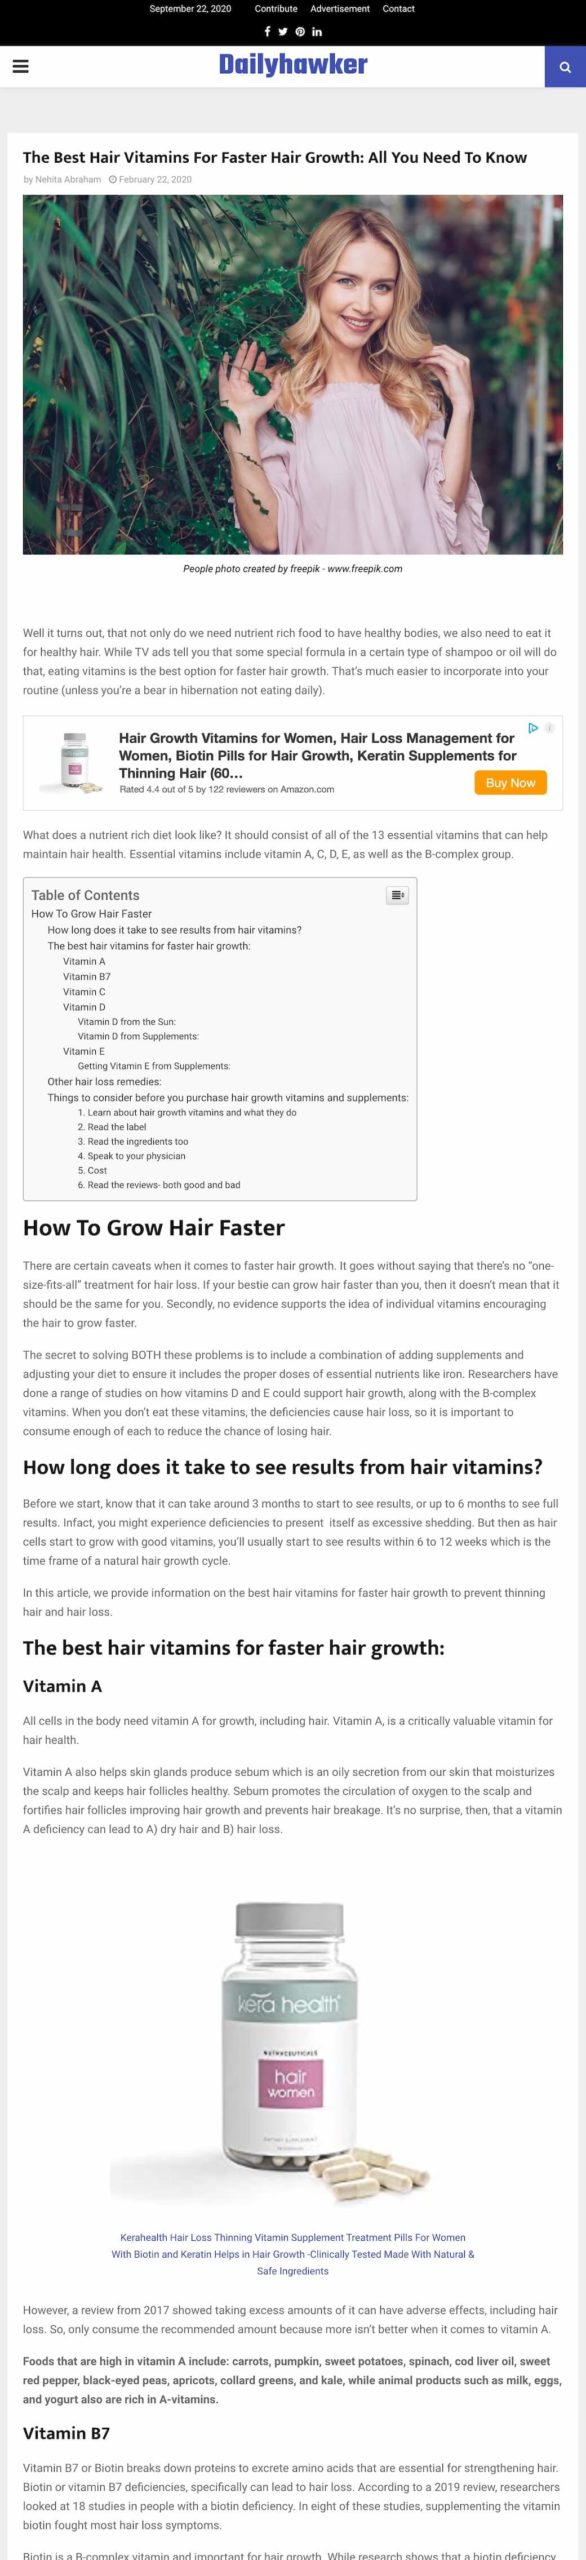 The Best Hair Vitamins For Faster Hair Growth: All You Need To Know